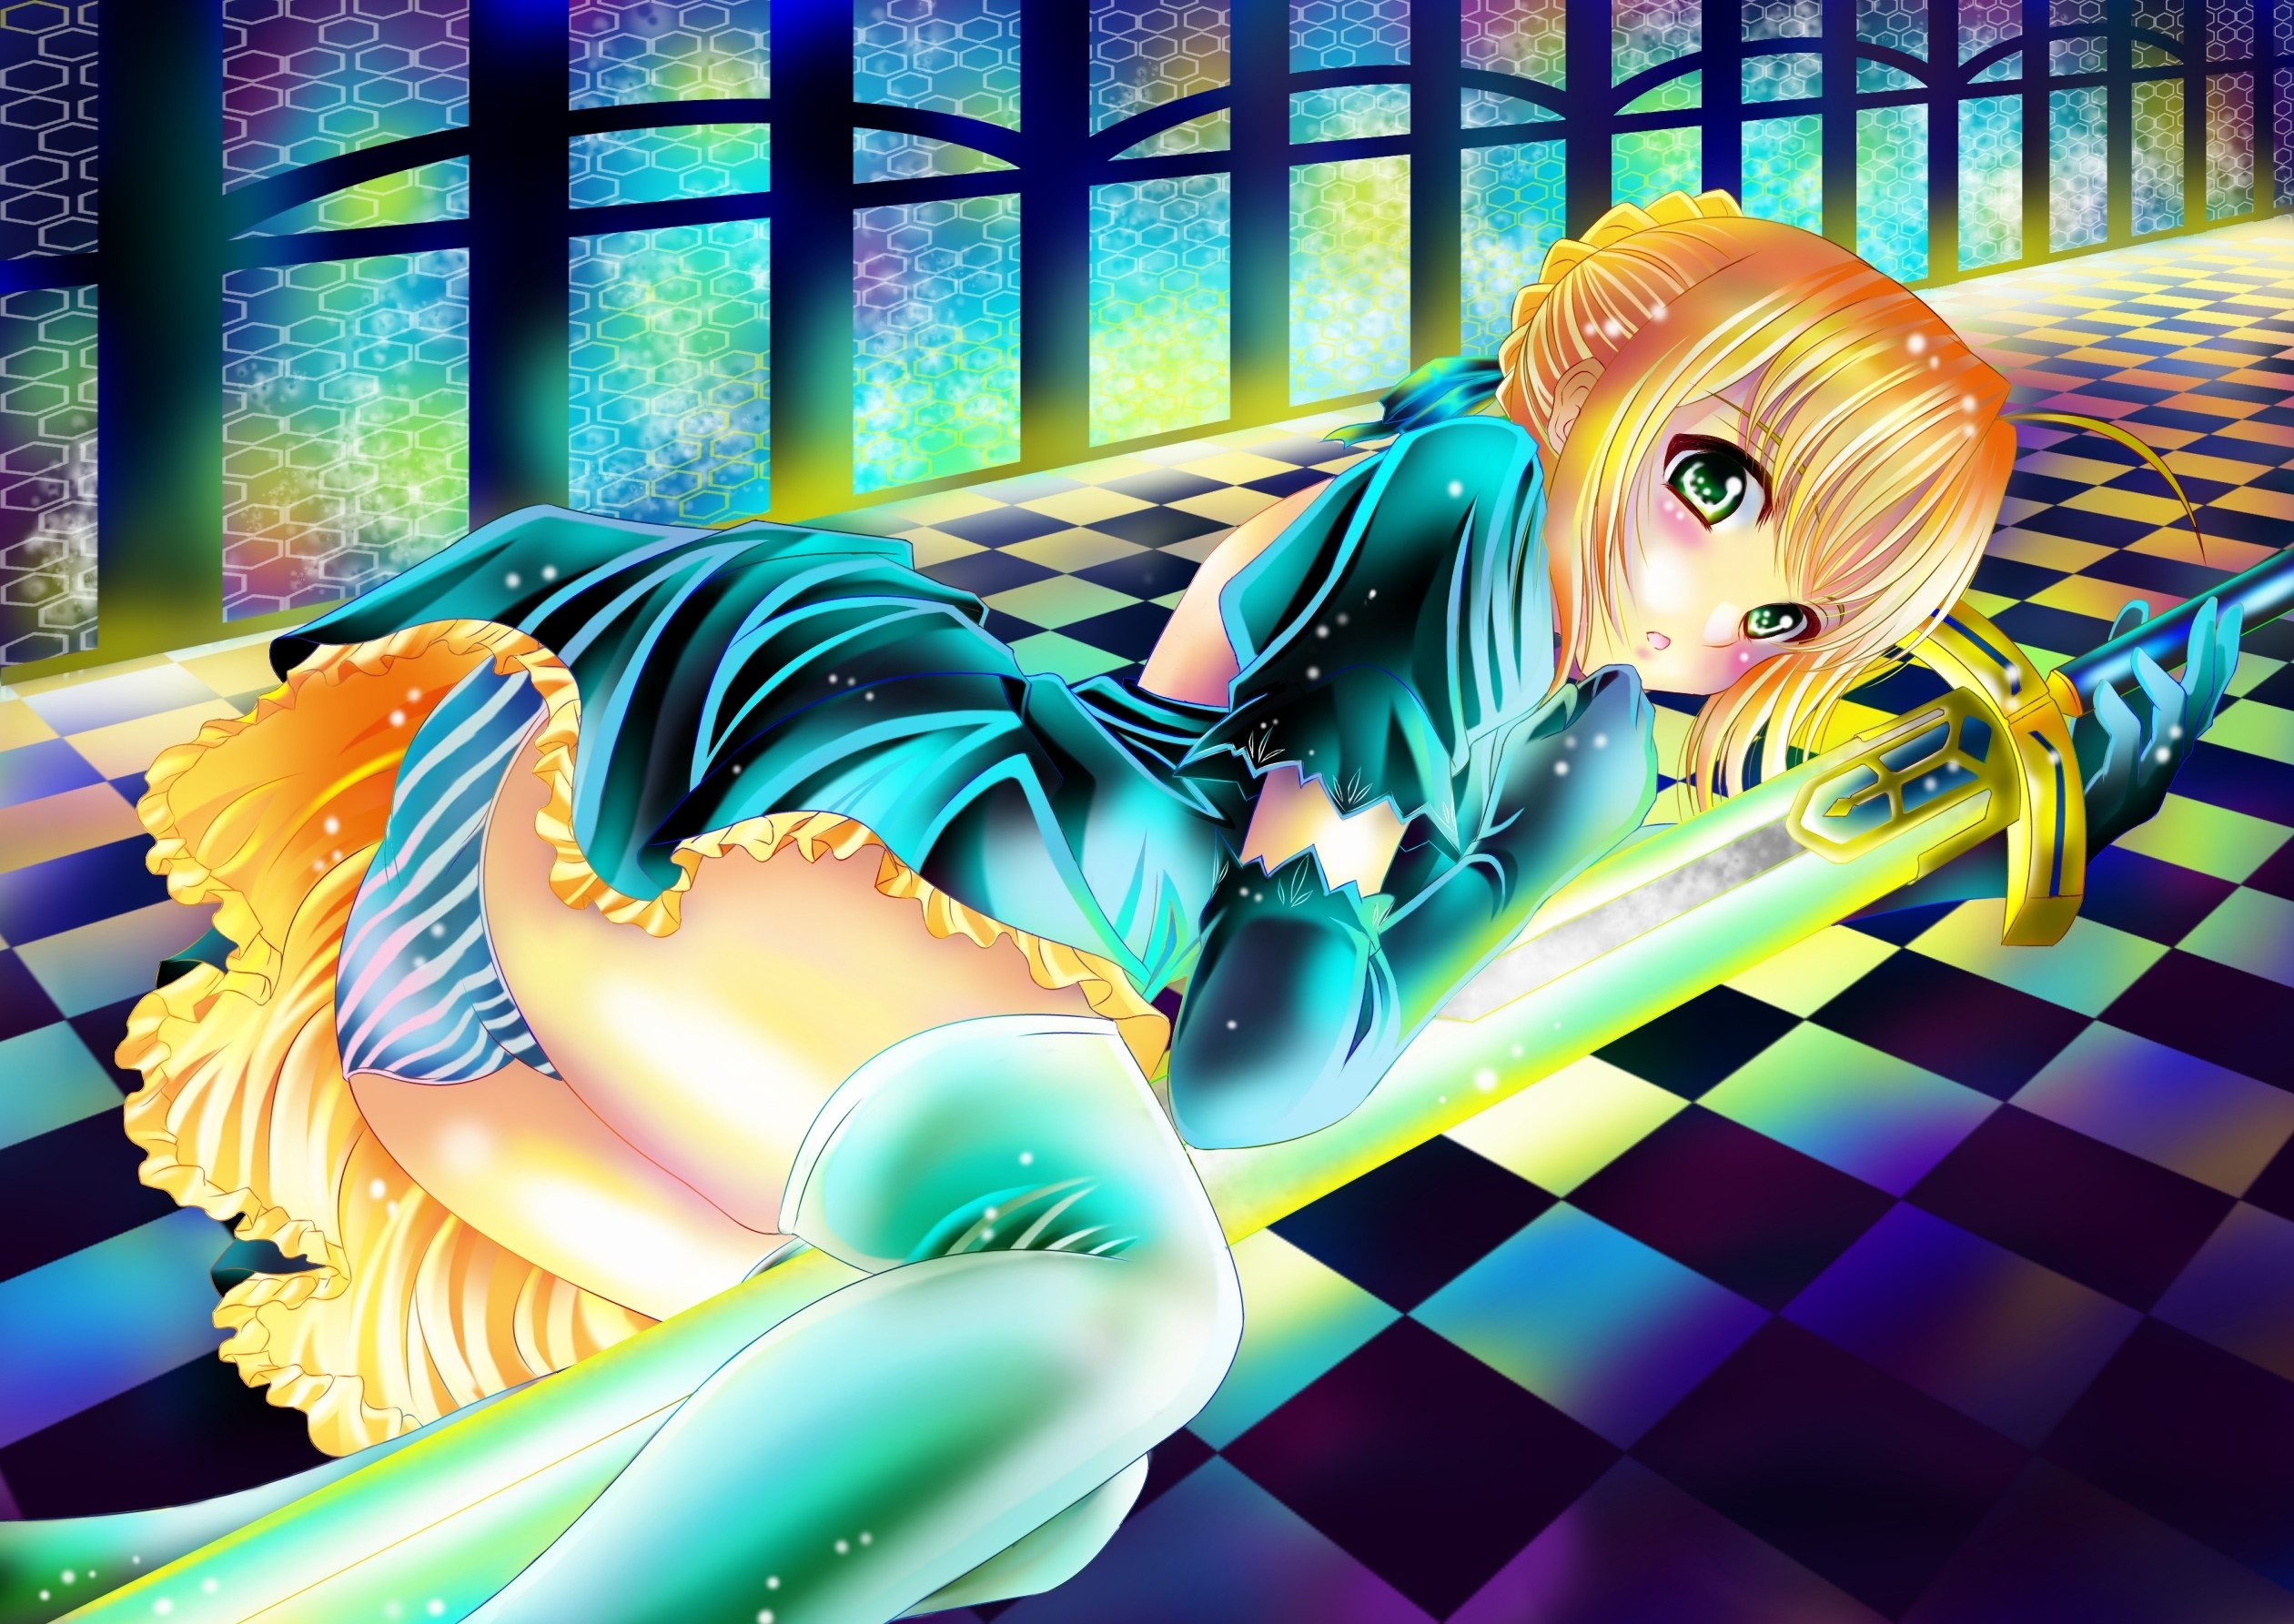 Anime 2521x1785 anime girls Saber Fate series anime ass rear view panties striped panties lying down legs together green eyes sword fantasy art fantasy girl women with swords